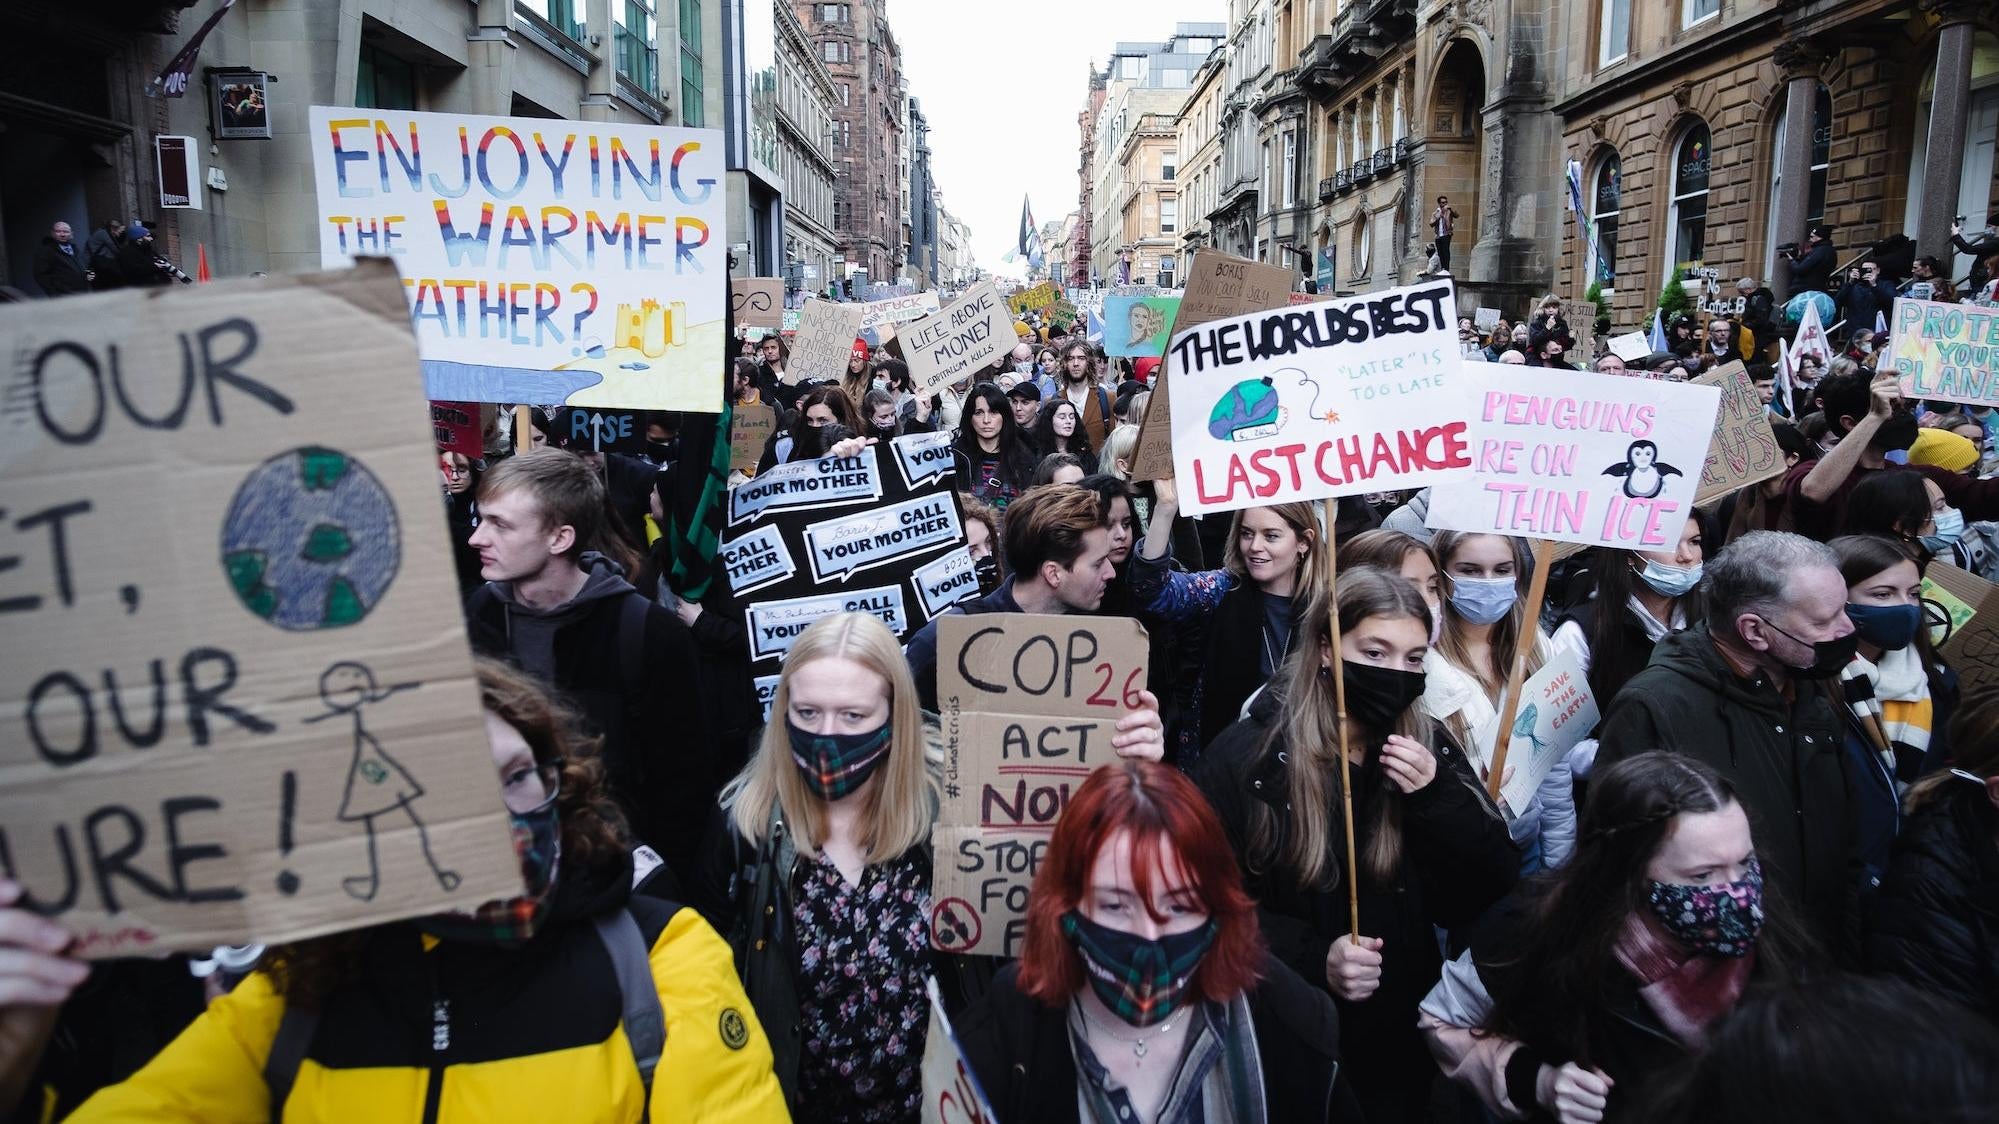 Protesters in the streets of Glasgow. (Photo: Brian Kahn)